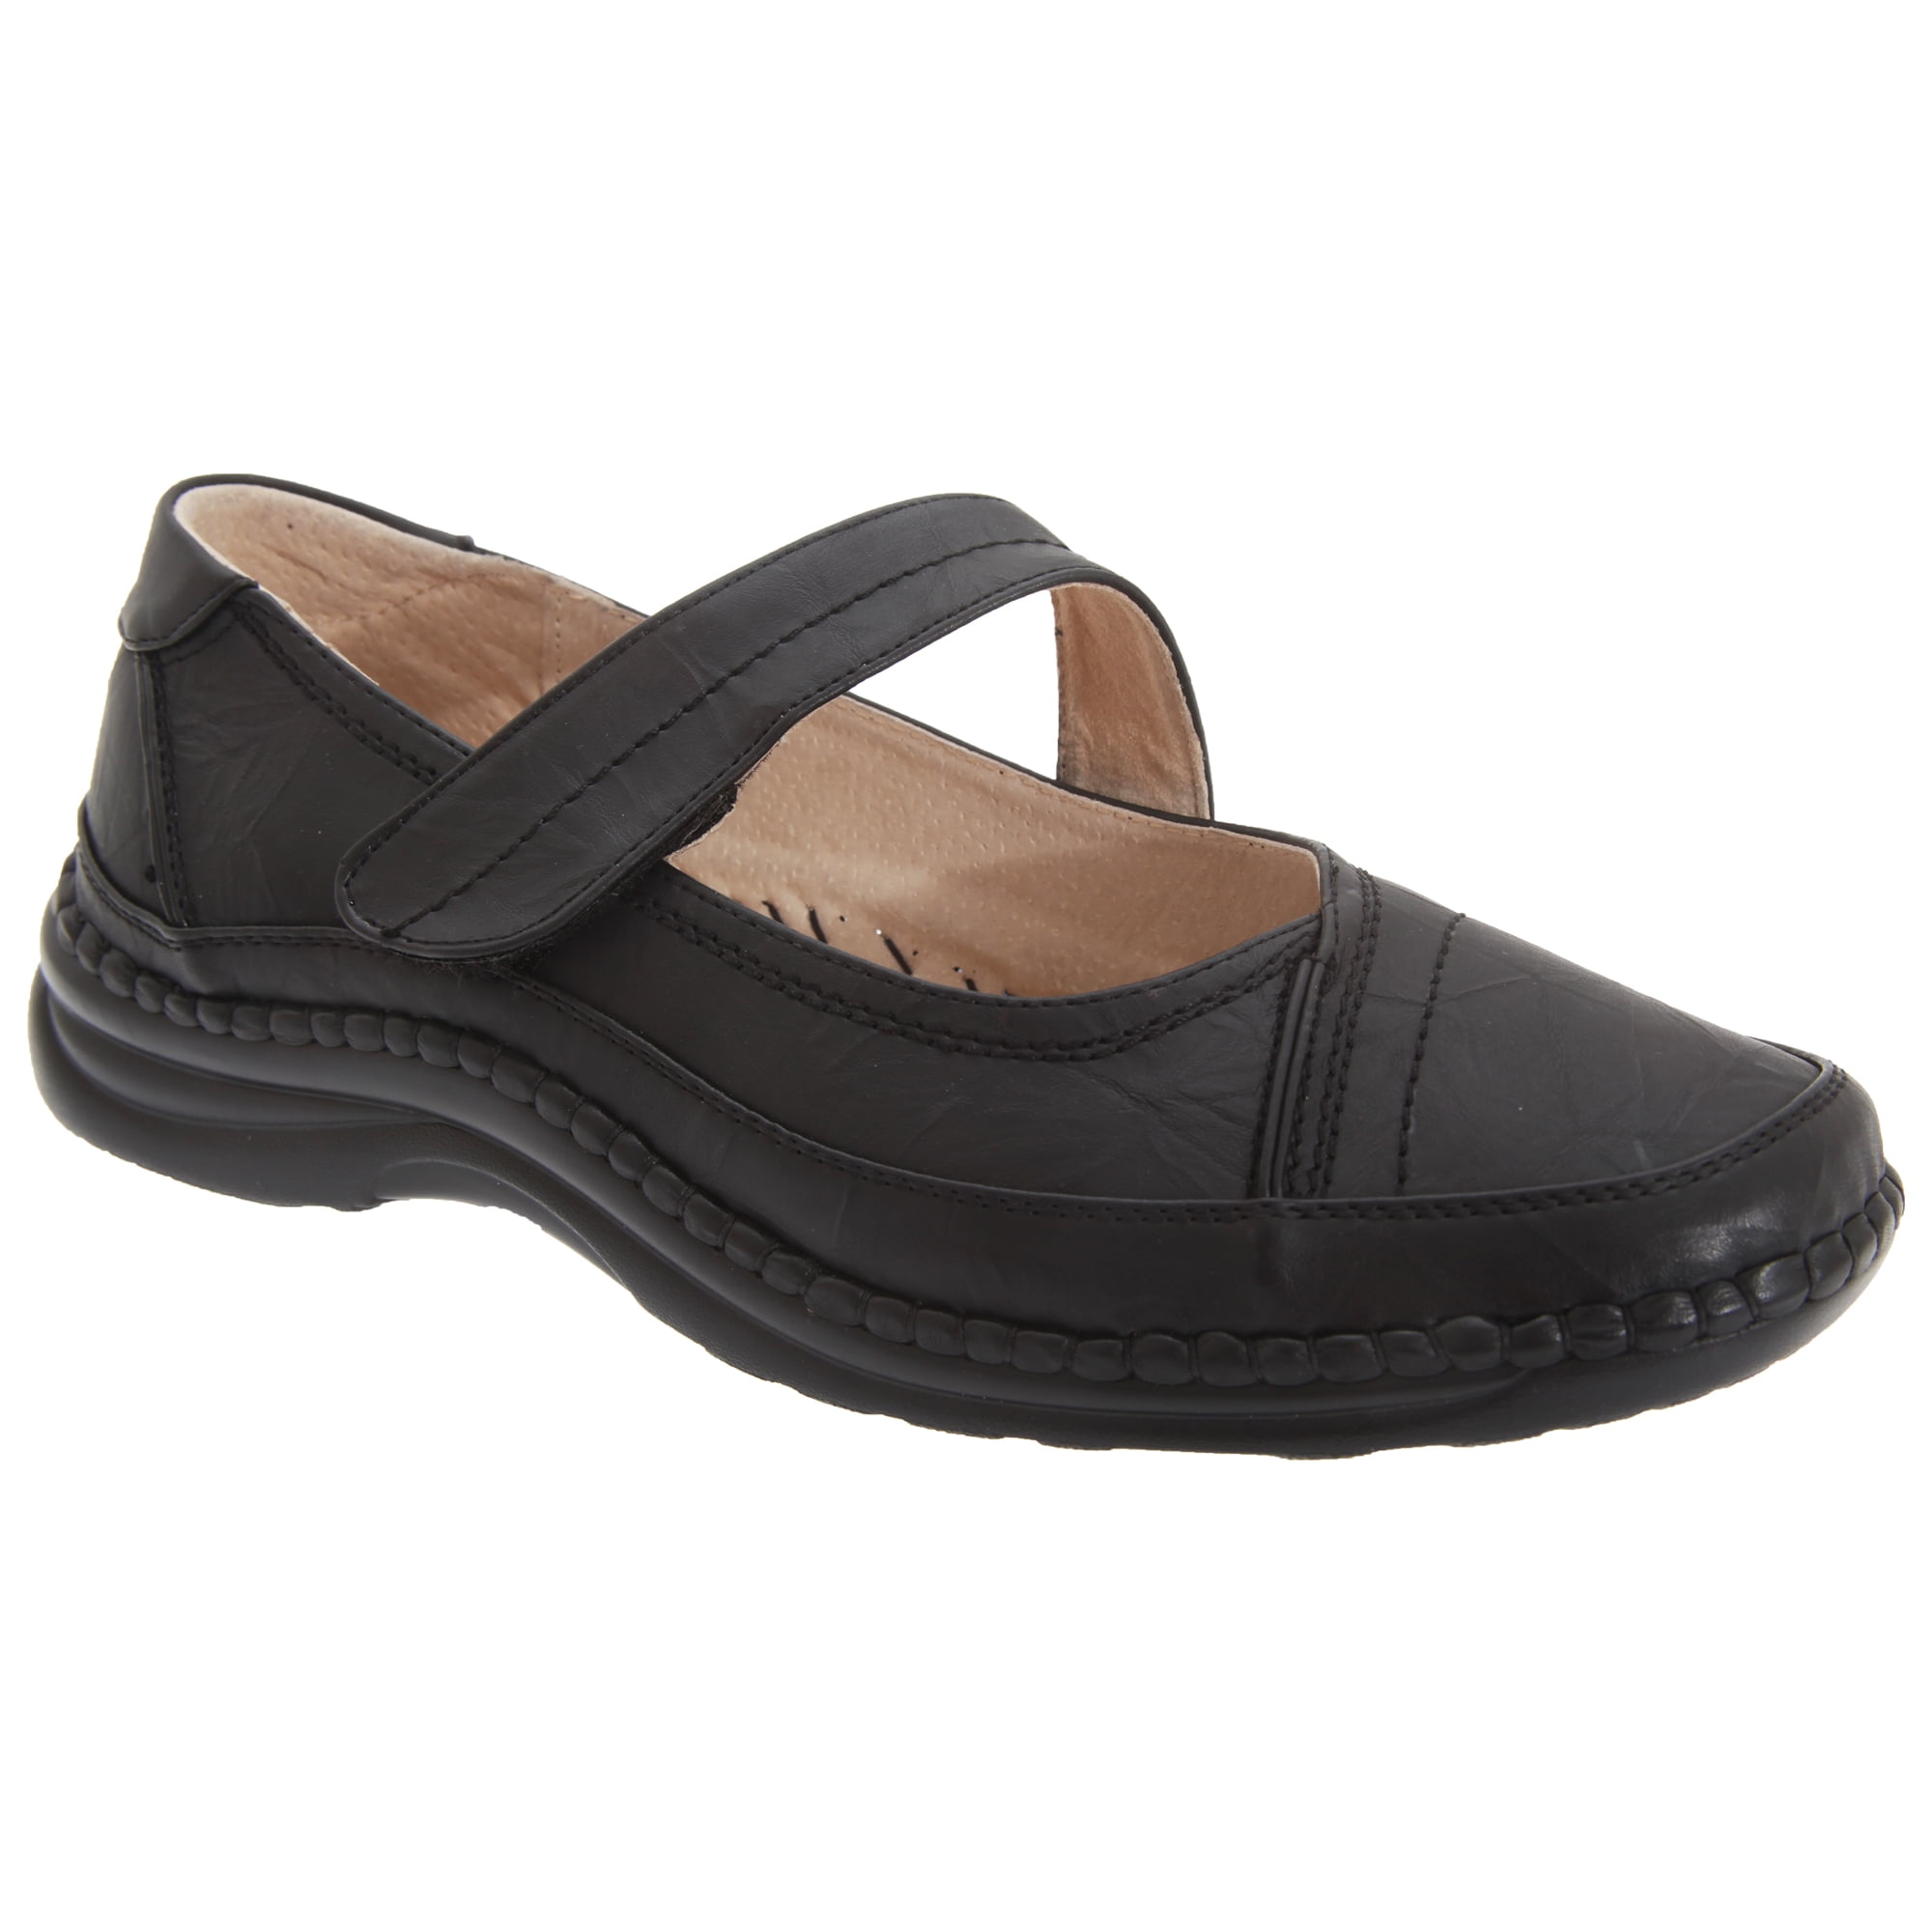 eee wide womens shoes